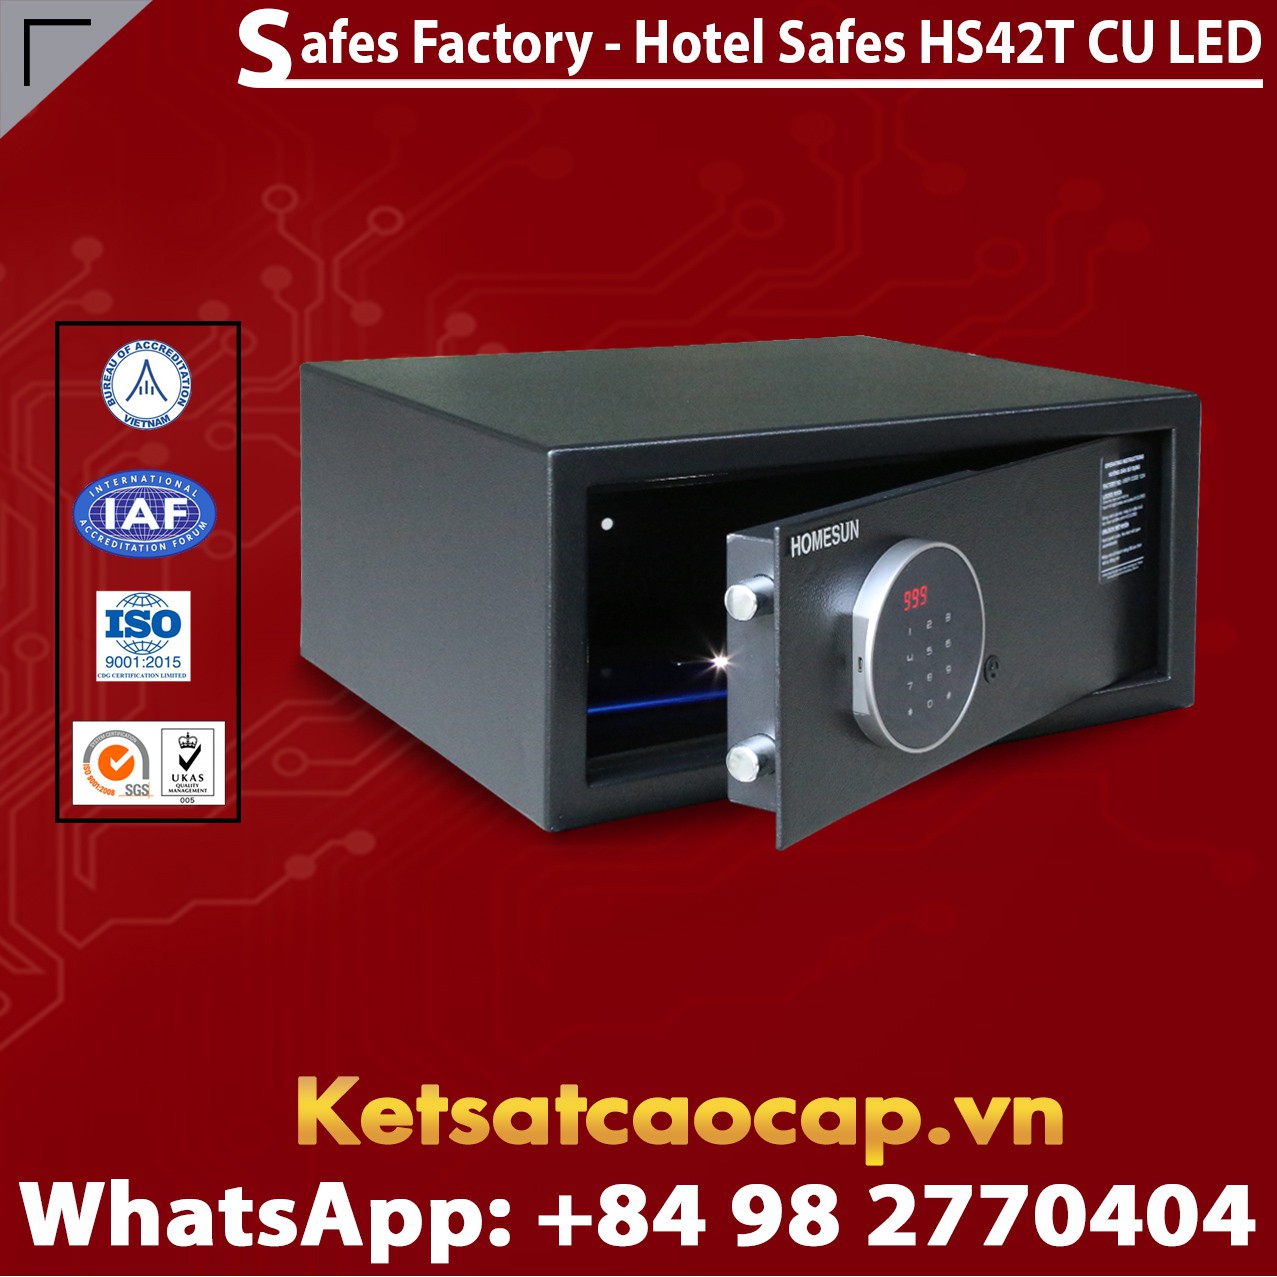 Best Sellers In Hotel Safes Suppliers and Exporters‎ HOMESUN